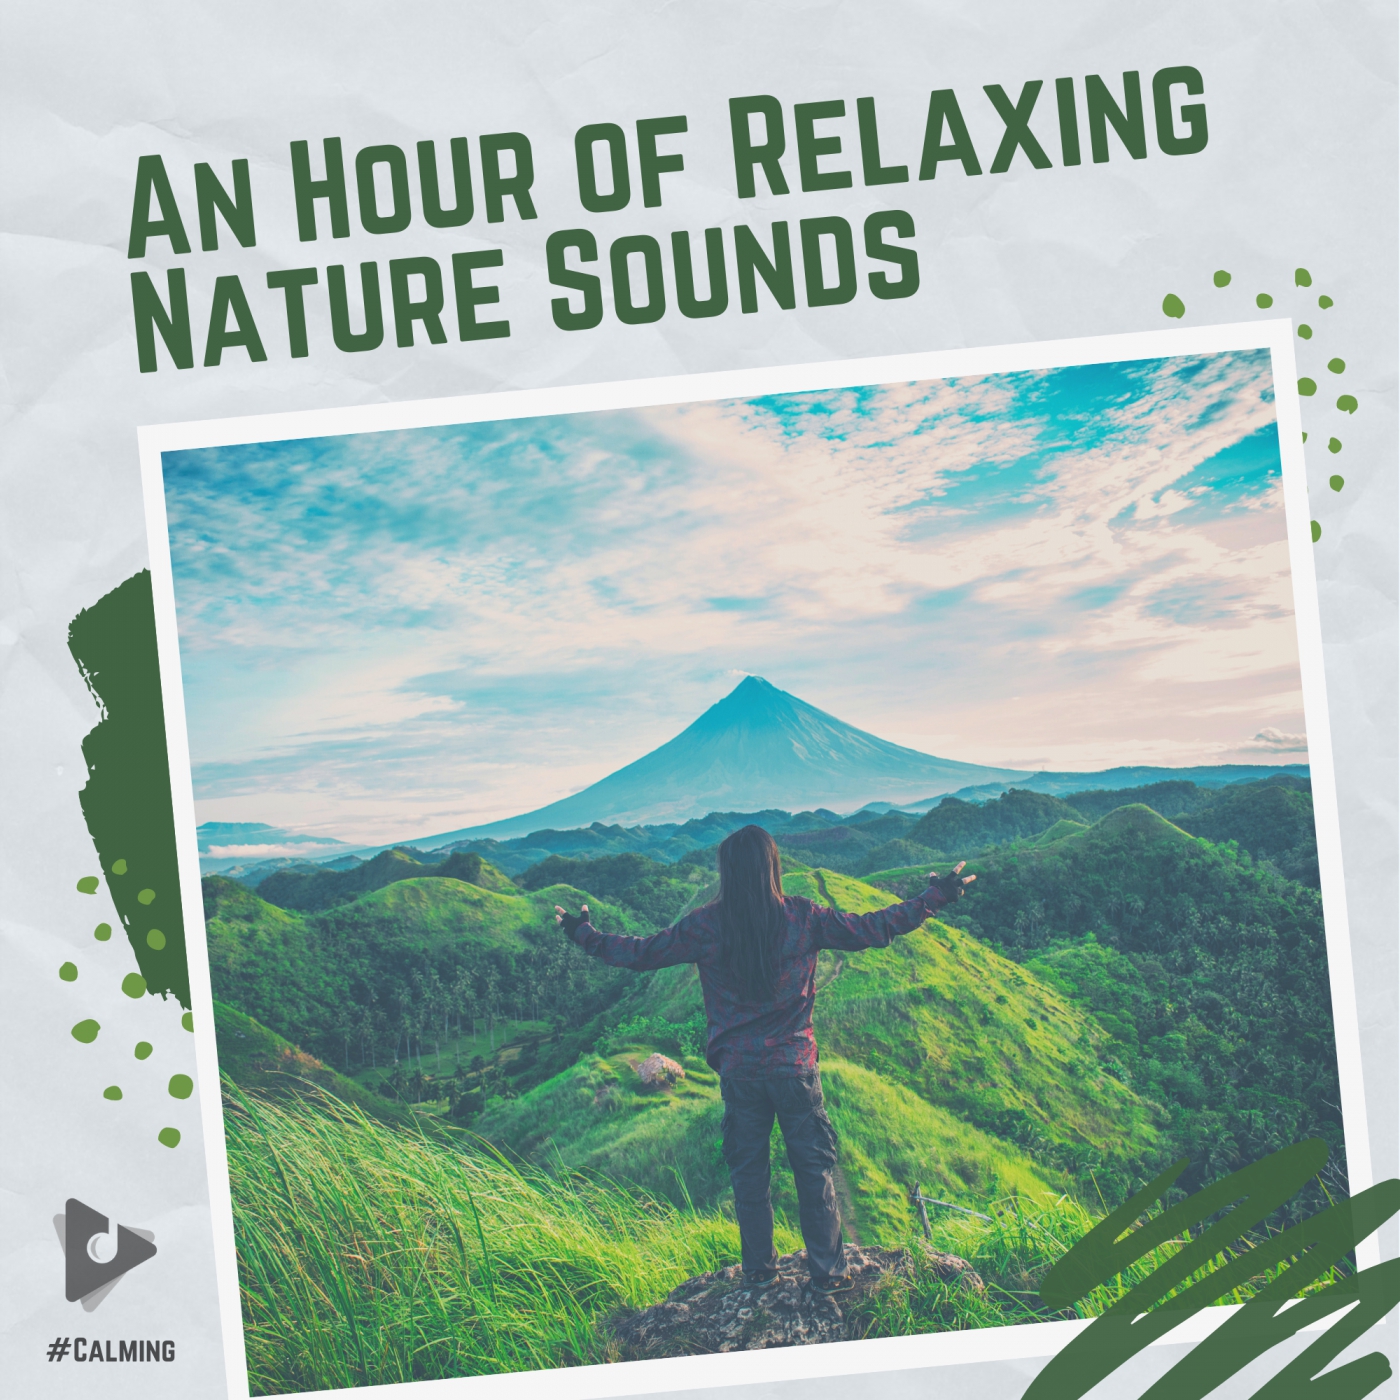 An Hour of Relaxing Nature Sounds